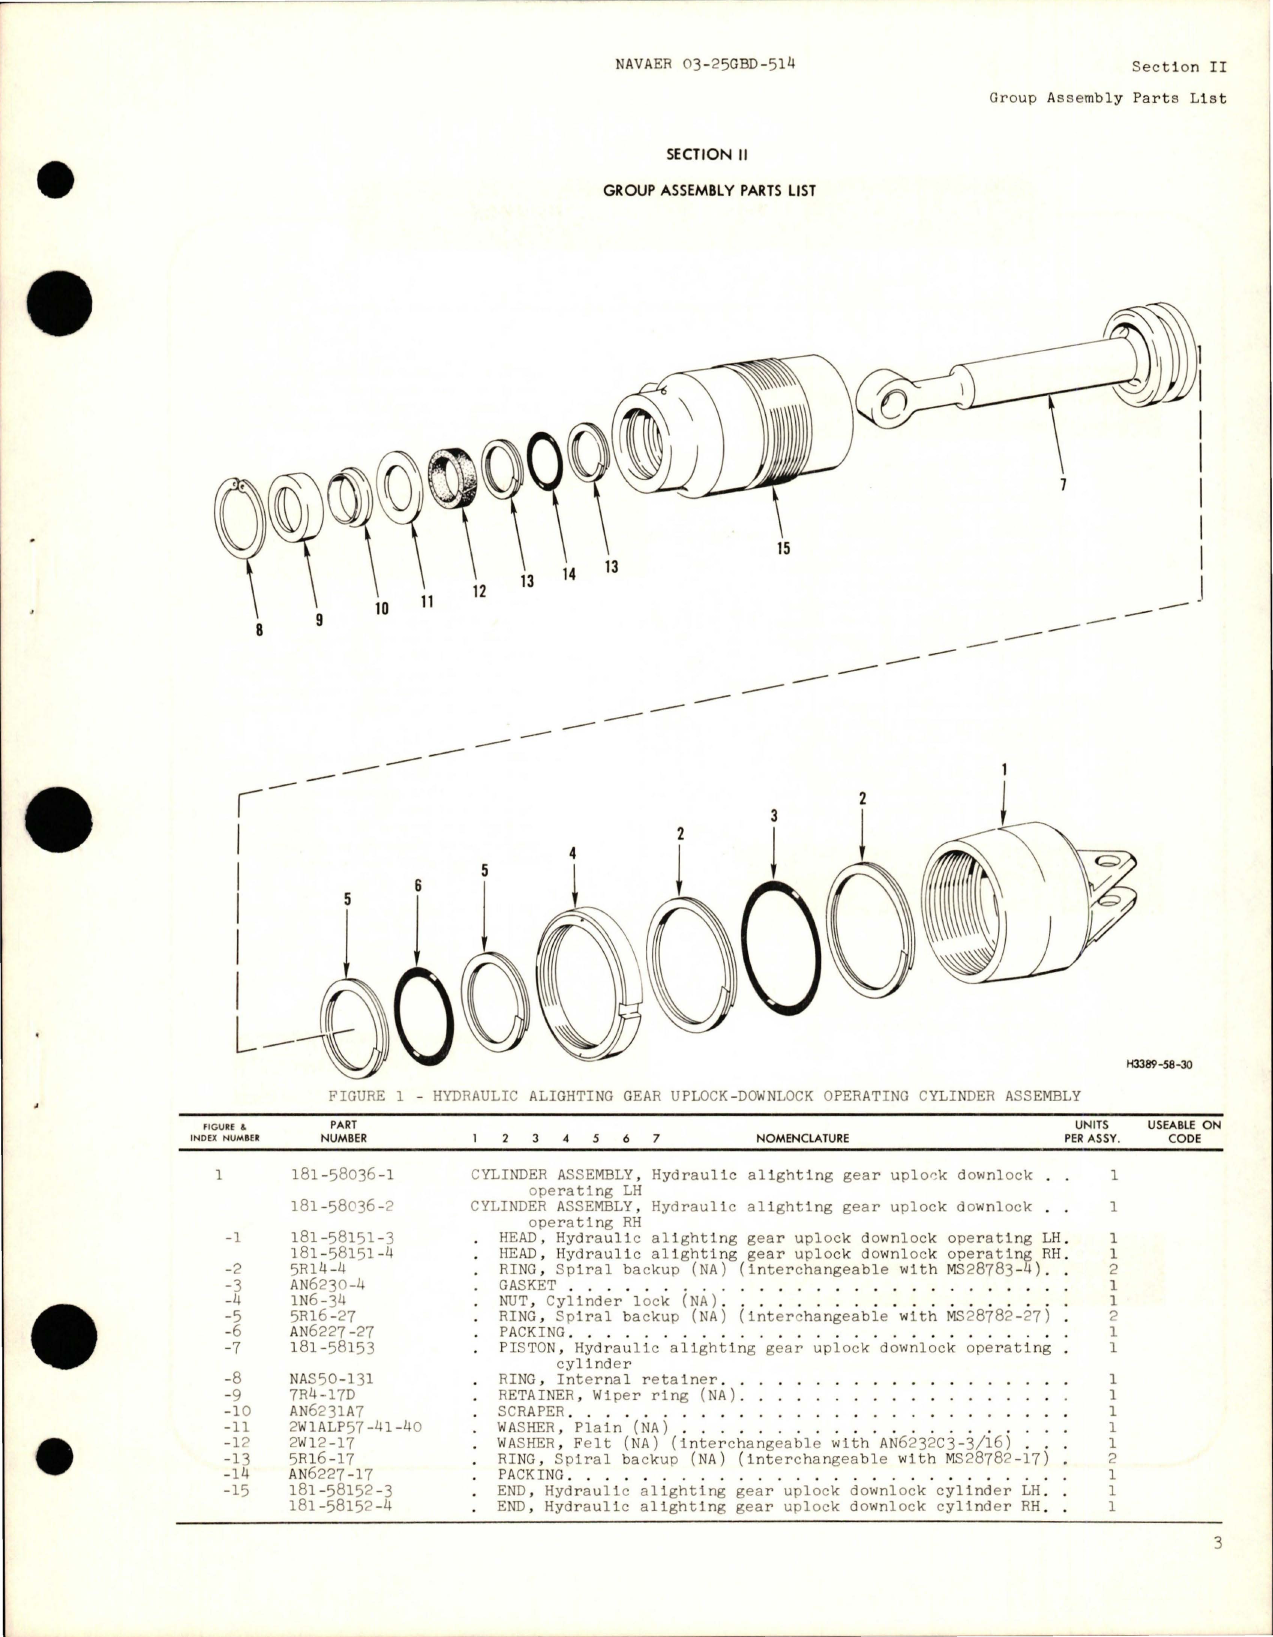 Sample page 5 from AirCorps Library document: Illustrated Parts Breakdown for Hydraulic Alighting Gear Uplock-Downlock Operating Cylinder Assembly 